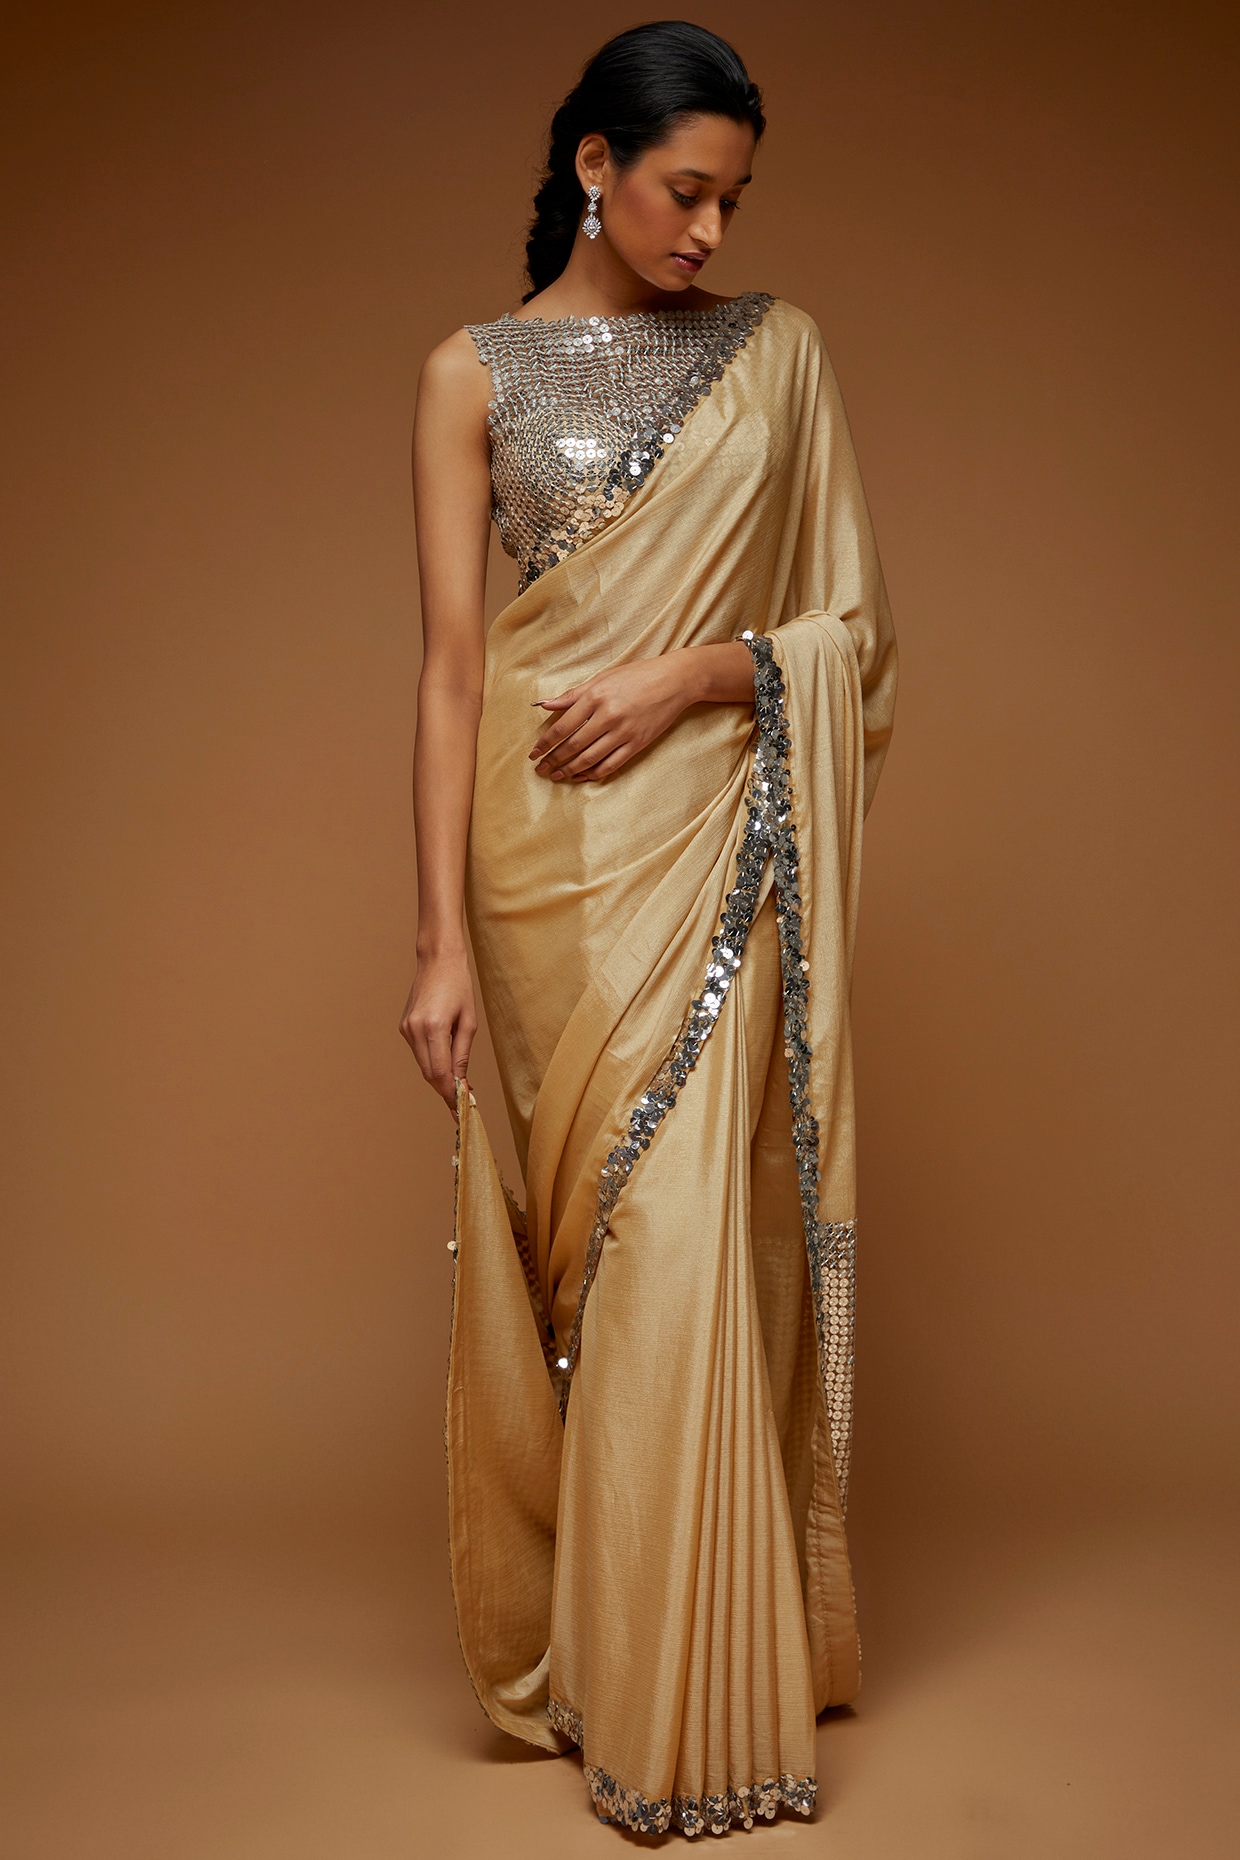 Shop Shimmer Saree for Women Online from India's Luxury Designers 2024